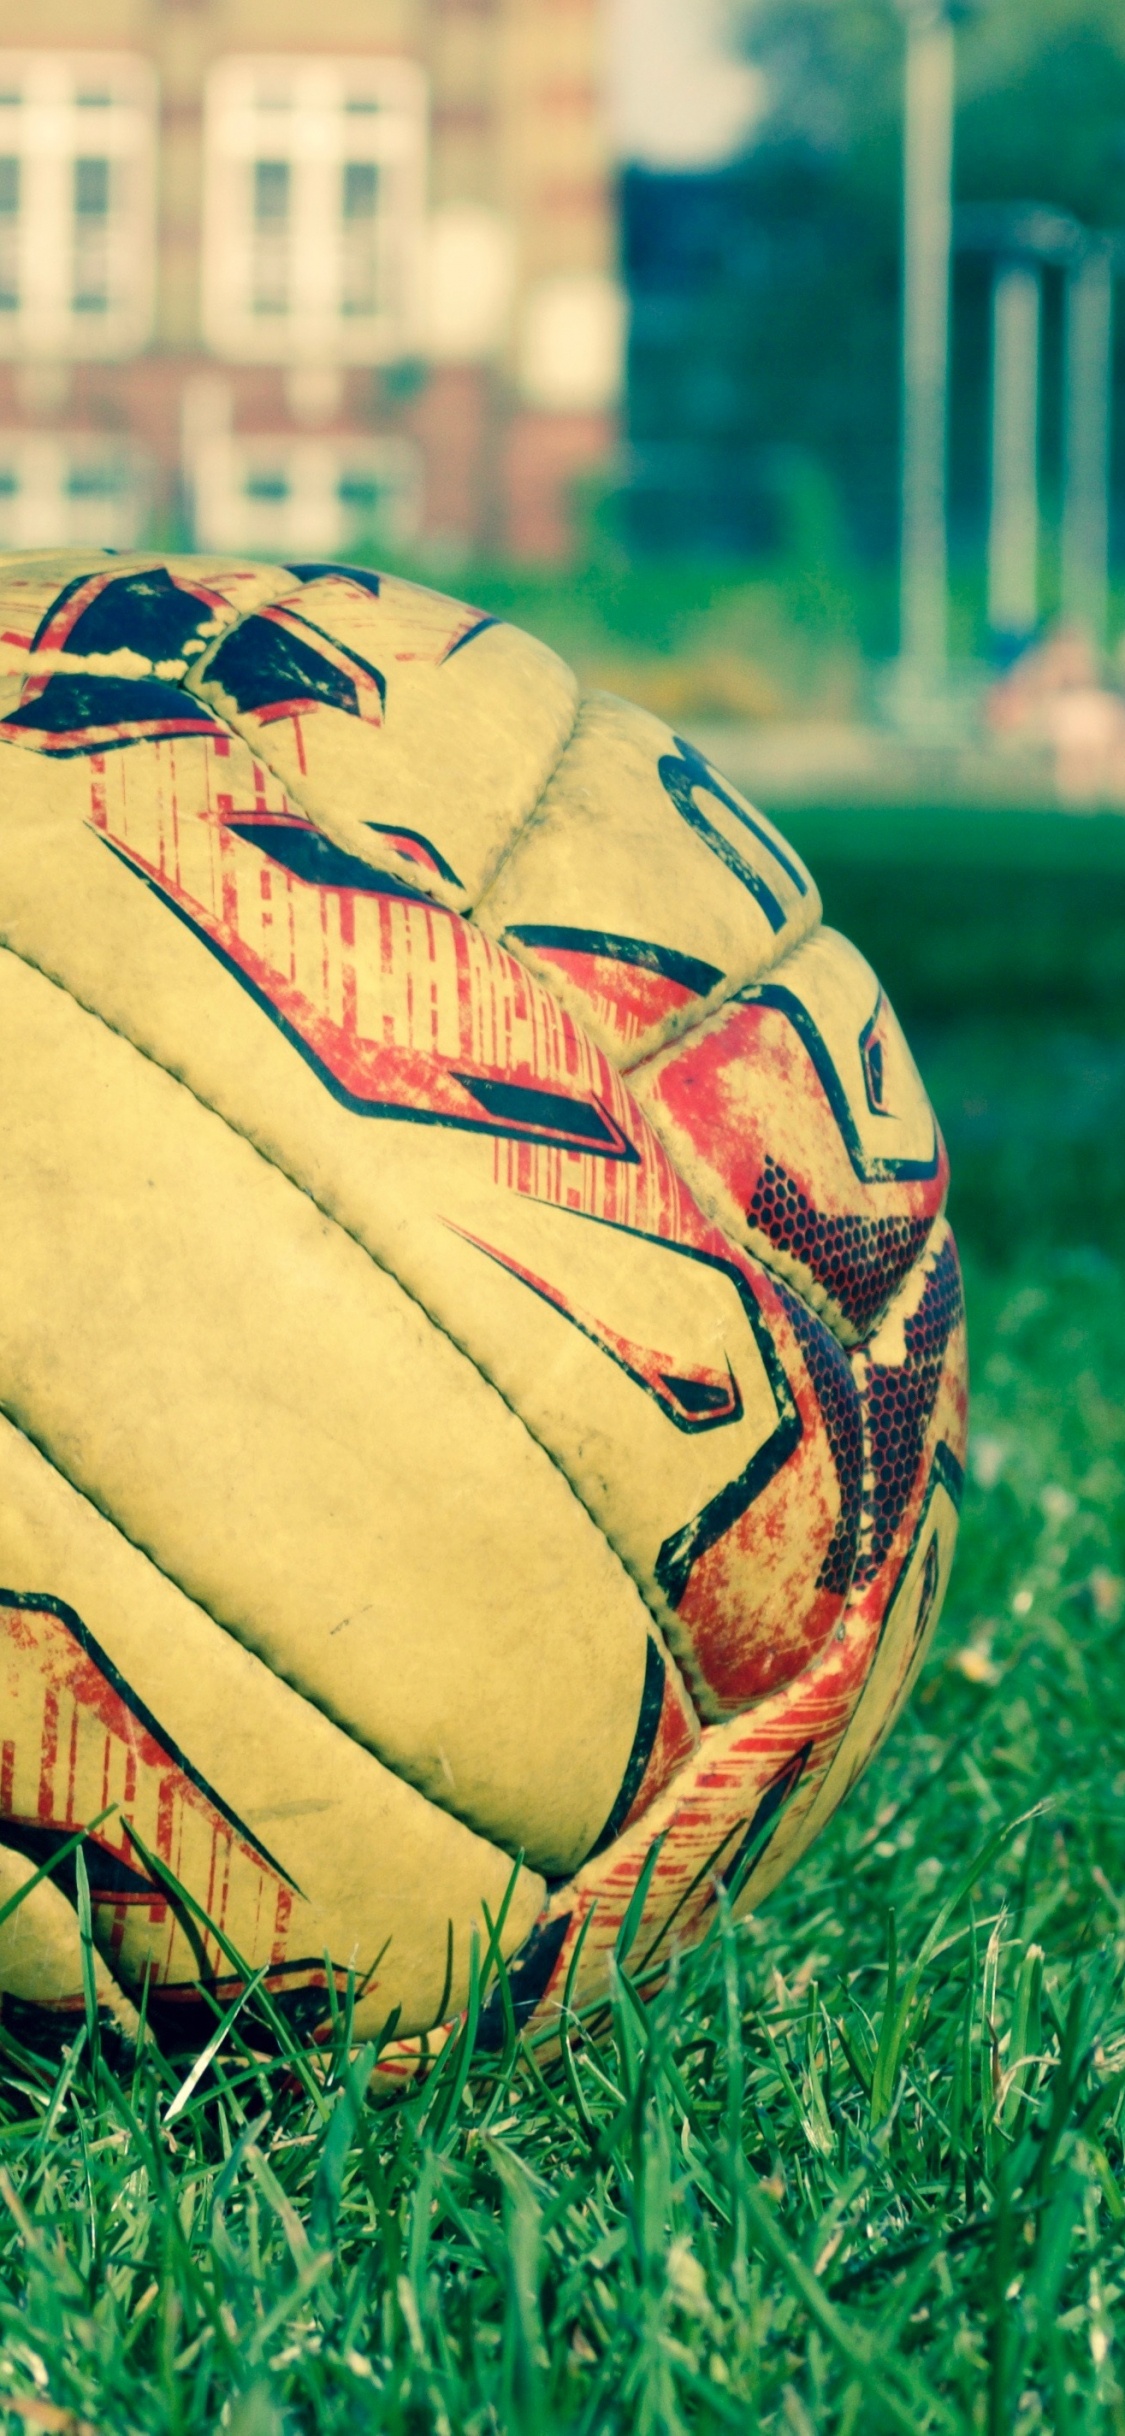 Brown and Black Soccer Ball on Green Grass Field During Daytime. Wallpaper in 1125x2436 Resolution